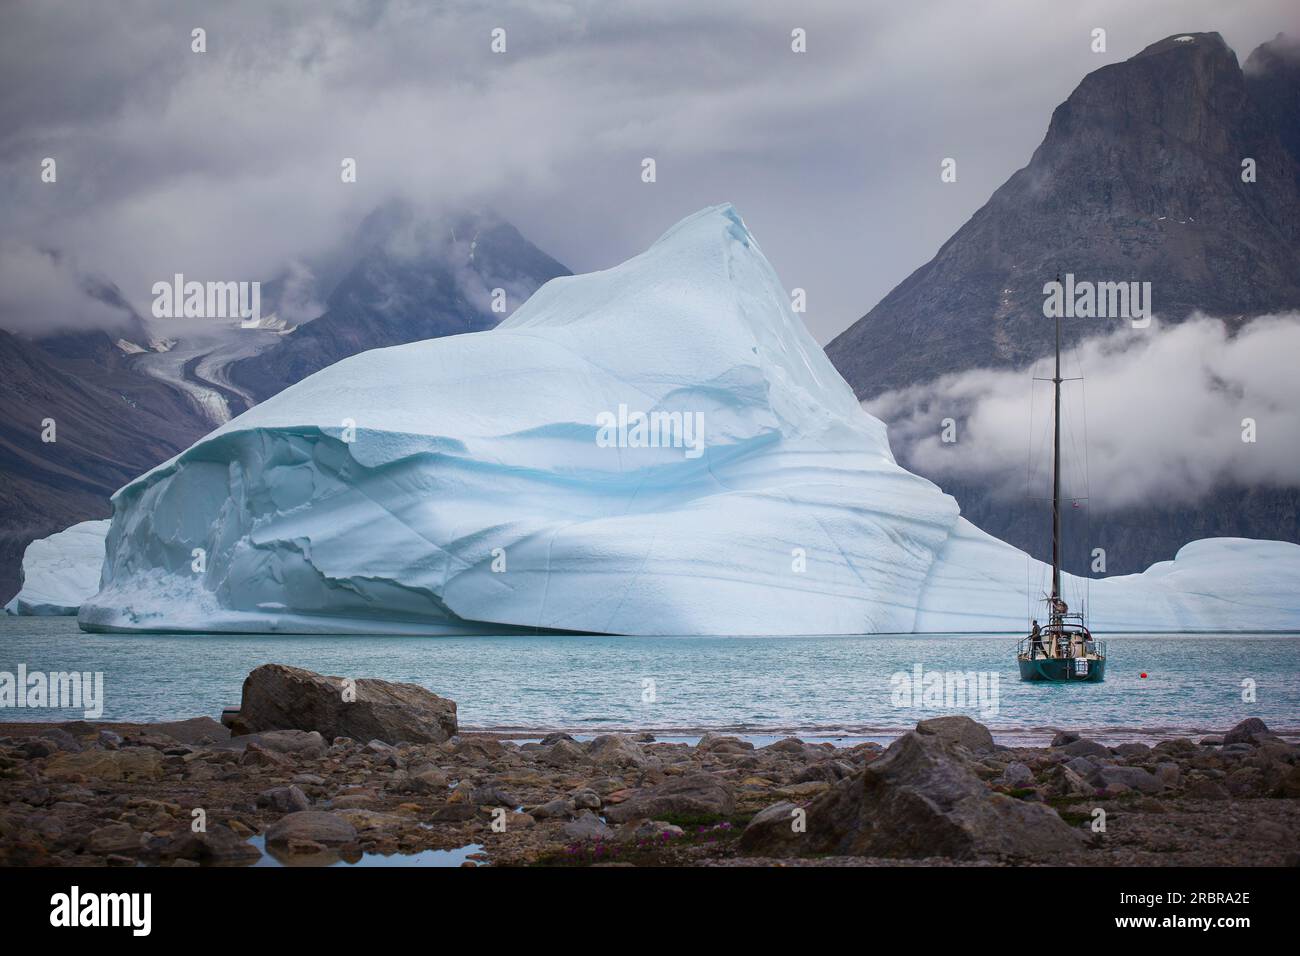 Sailboat anchored in a fjord in Greenland. Surrounded by icebergs. beautiful mountains and glaciers in the background. Man is fishing from the boat. Stock Photo